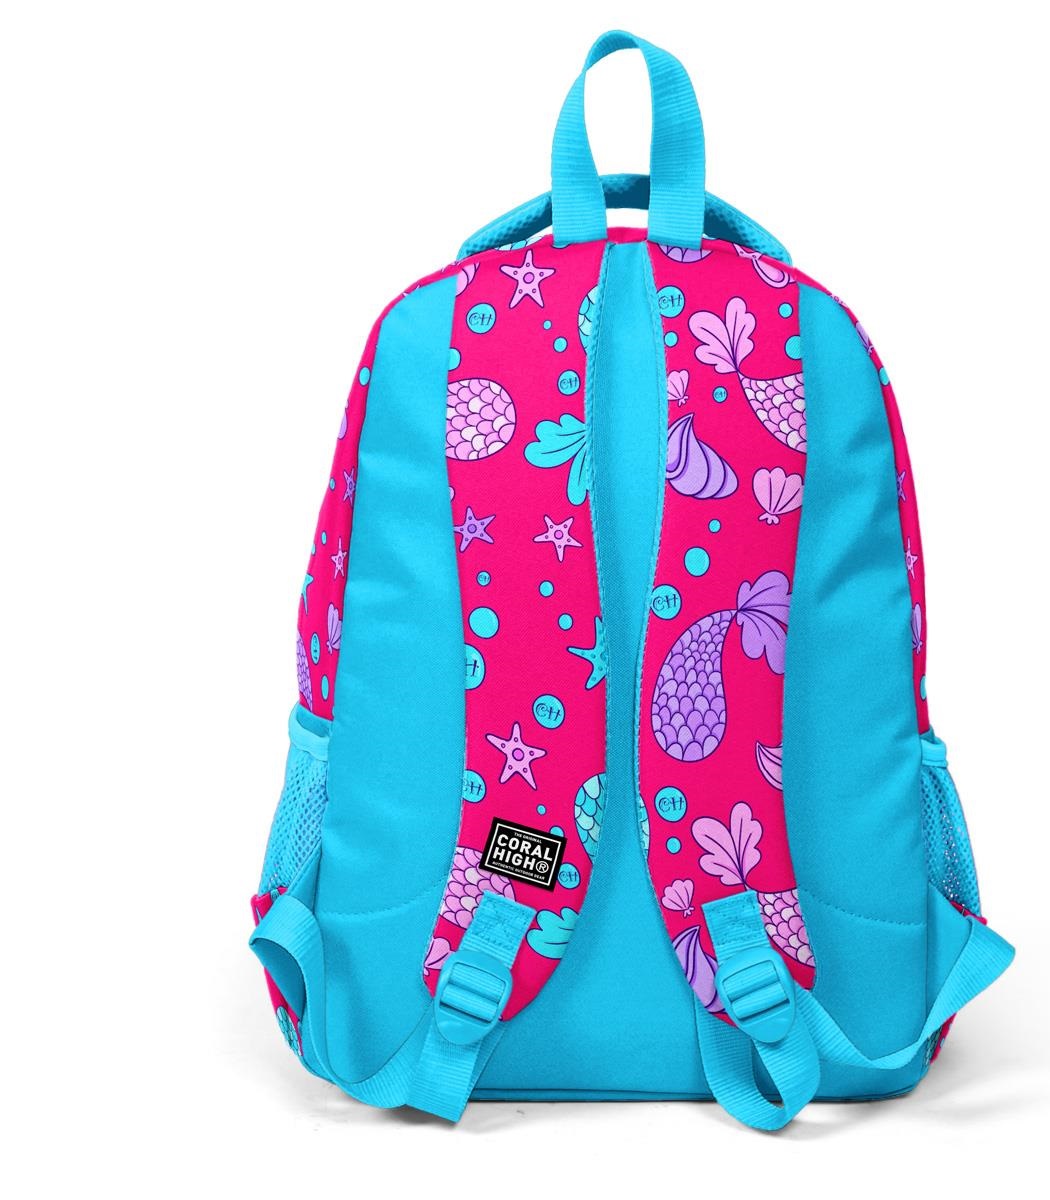 Coral High Kids Three Compartment School Backpack - Pink Mermaid Pattern